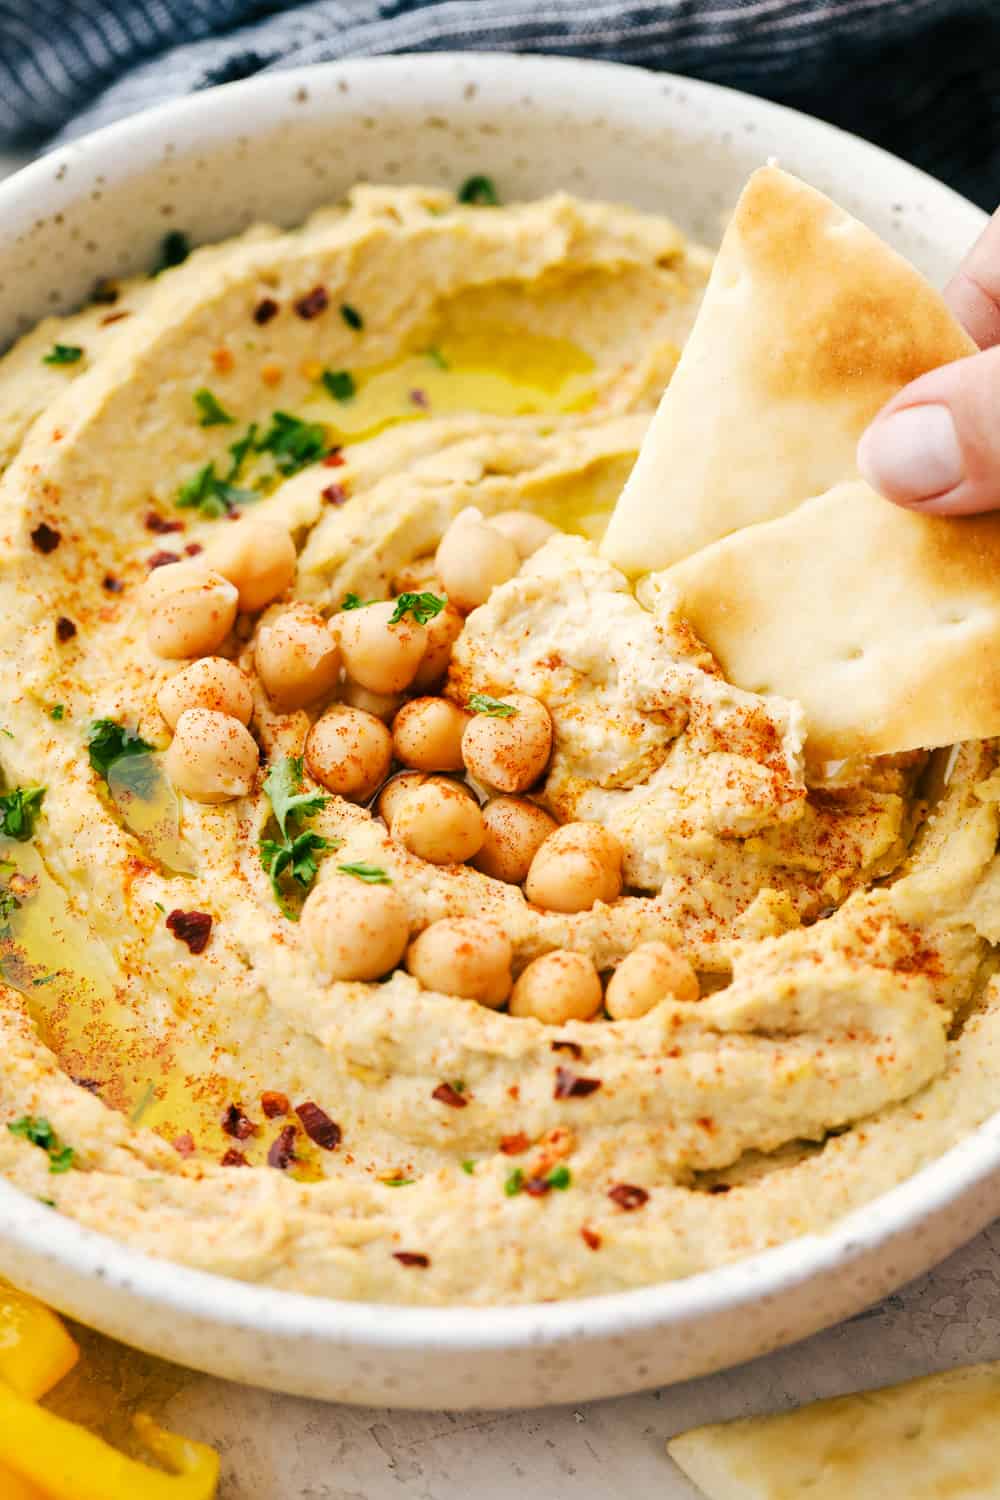 Close view of homemade hummus with chickpeas on top. Pita bread is being dipped into the bowl of hummus.